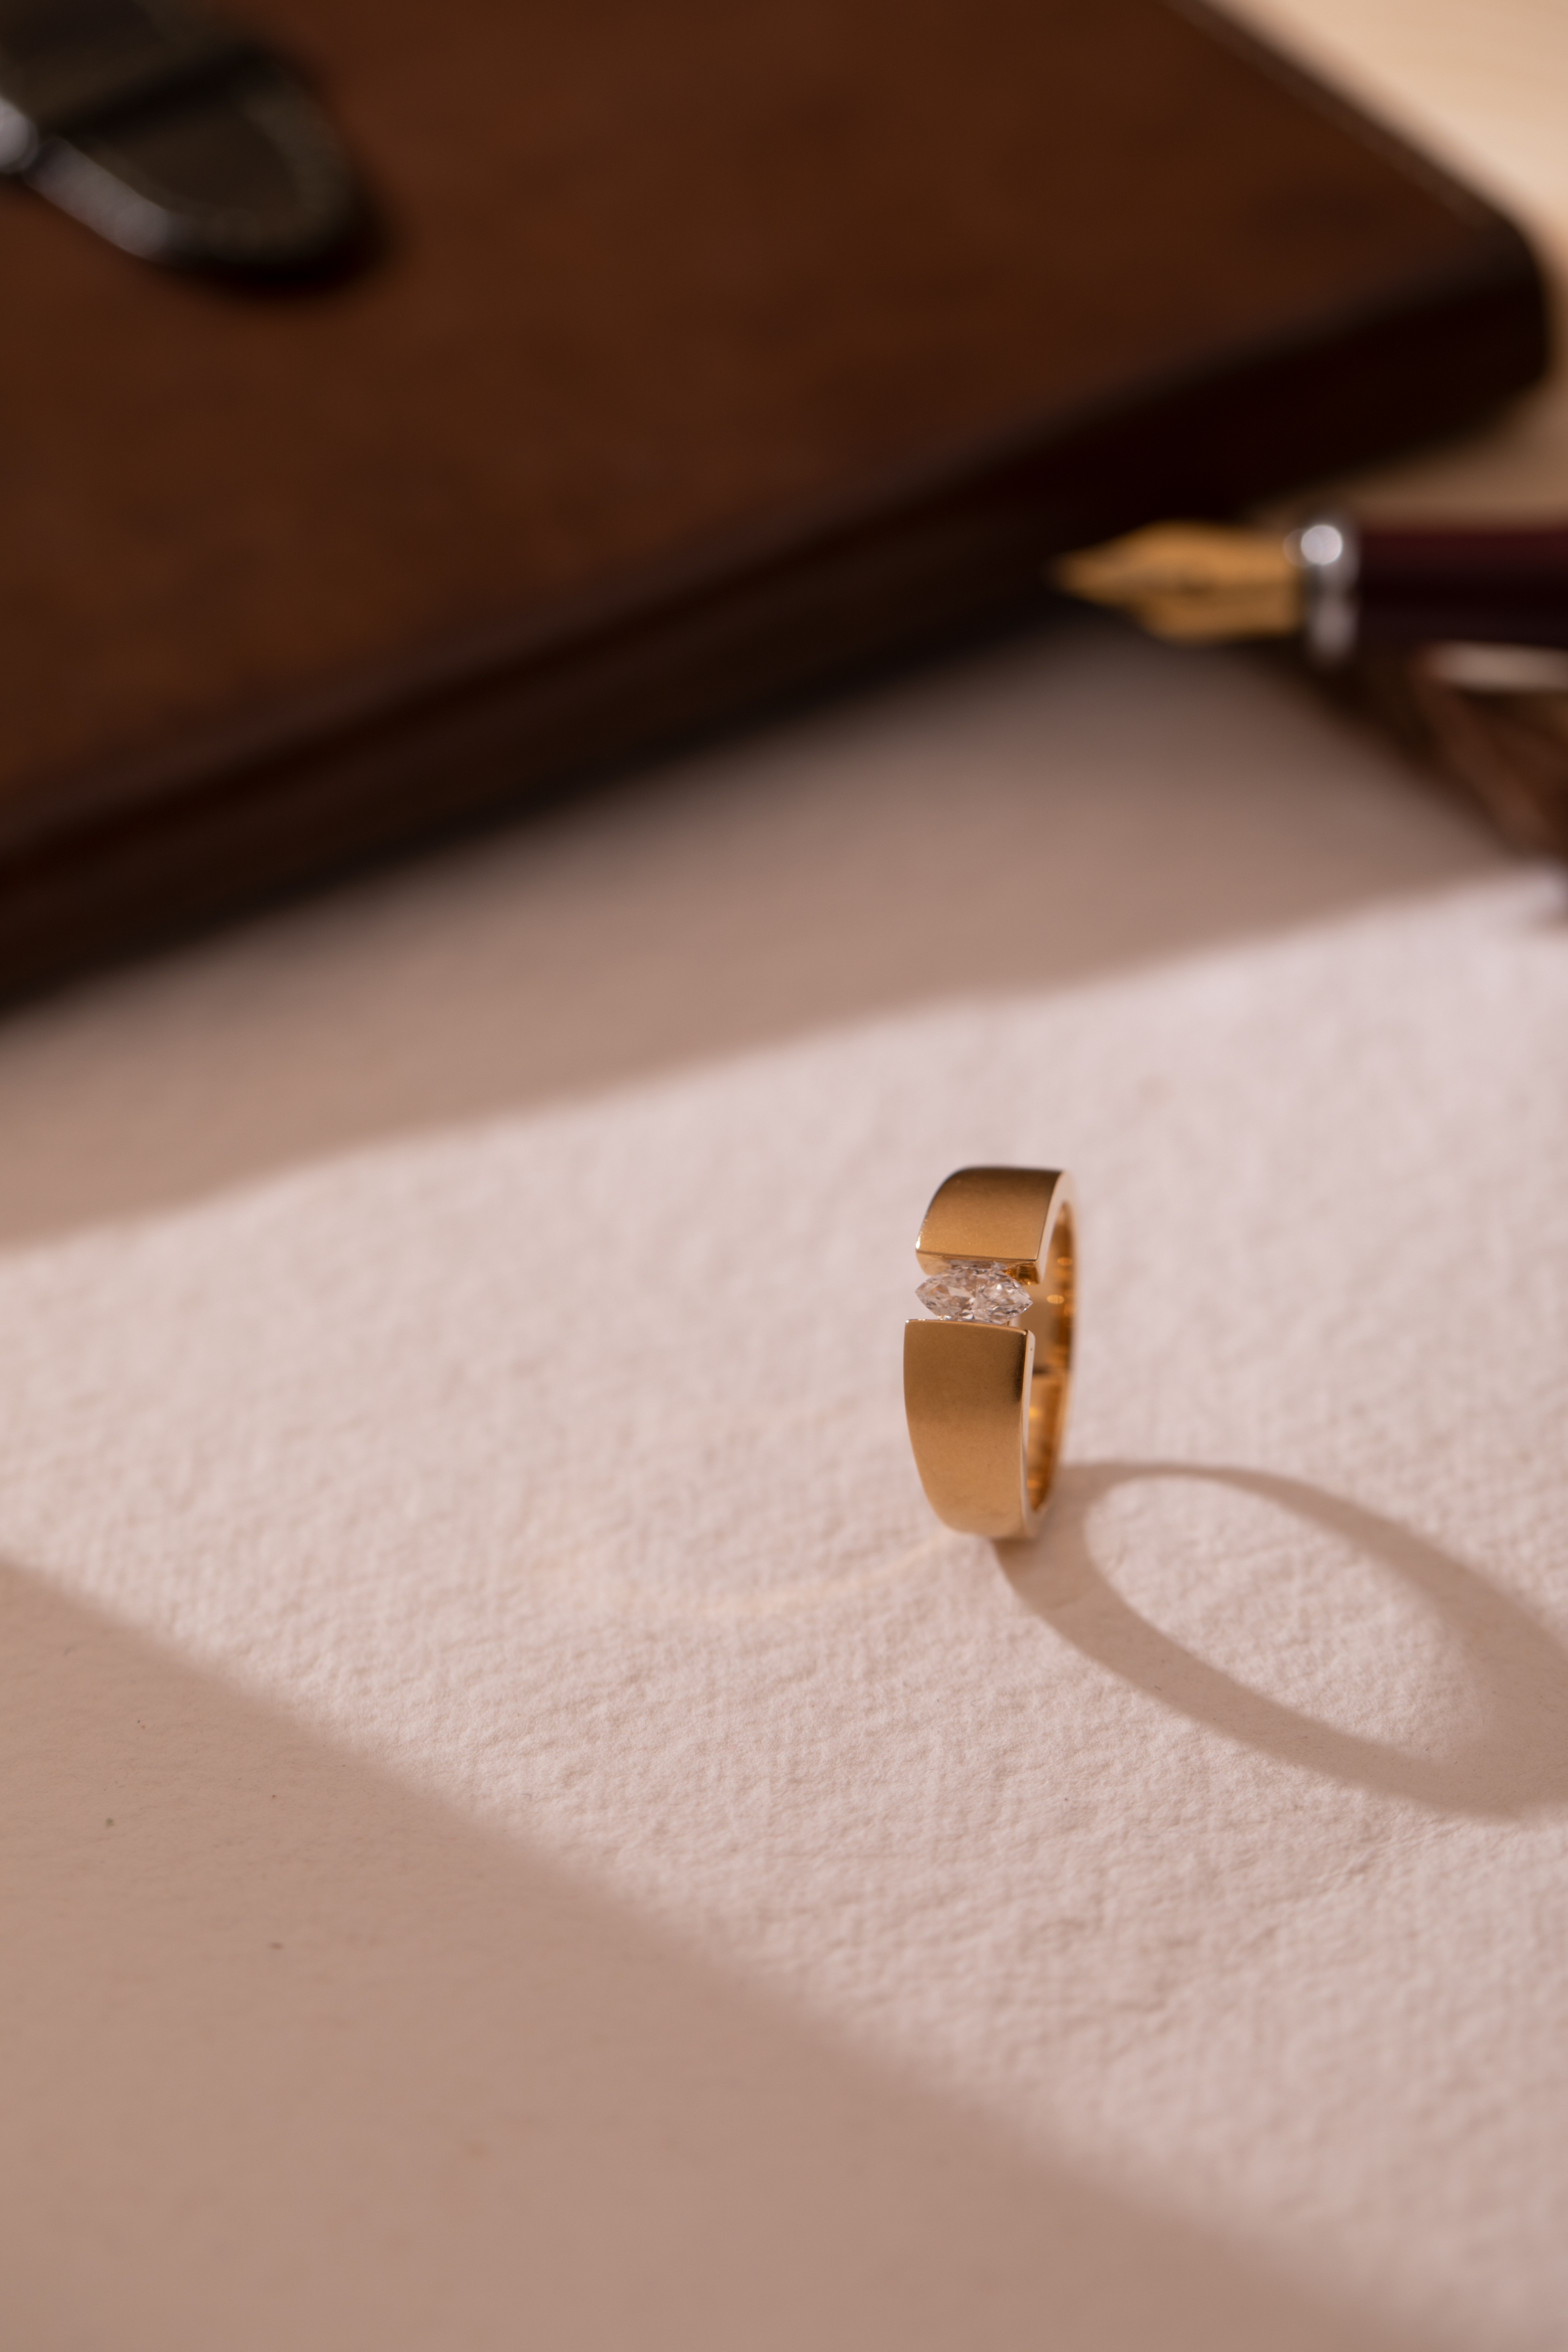 Is the Men's Gold Wedding Band Out of Style? - WSJ